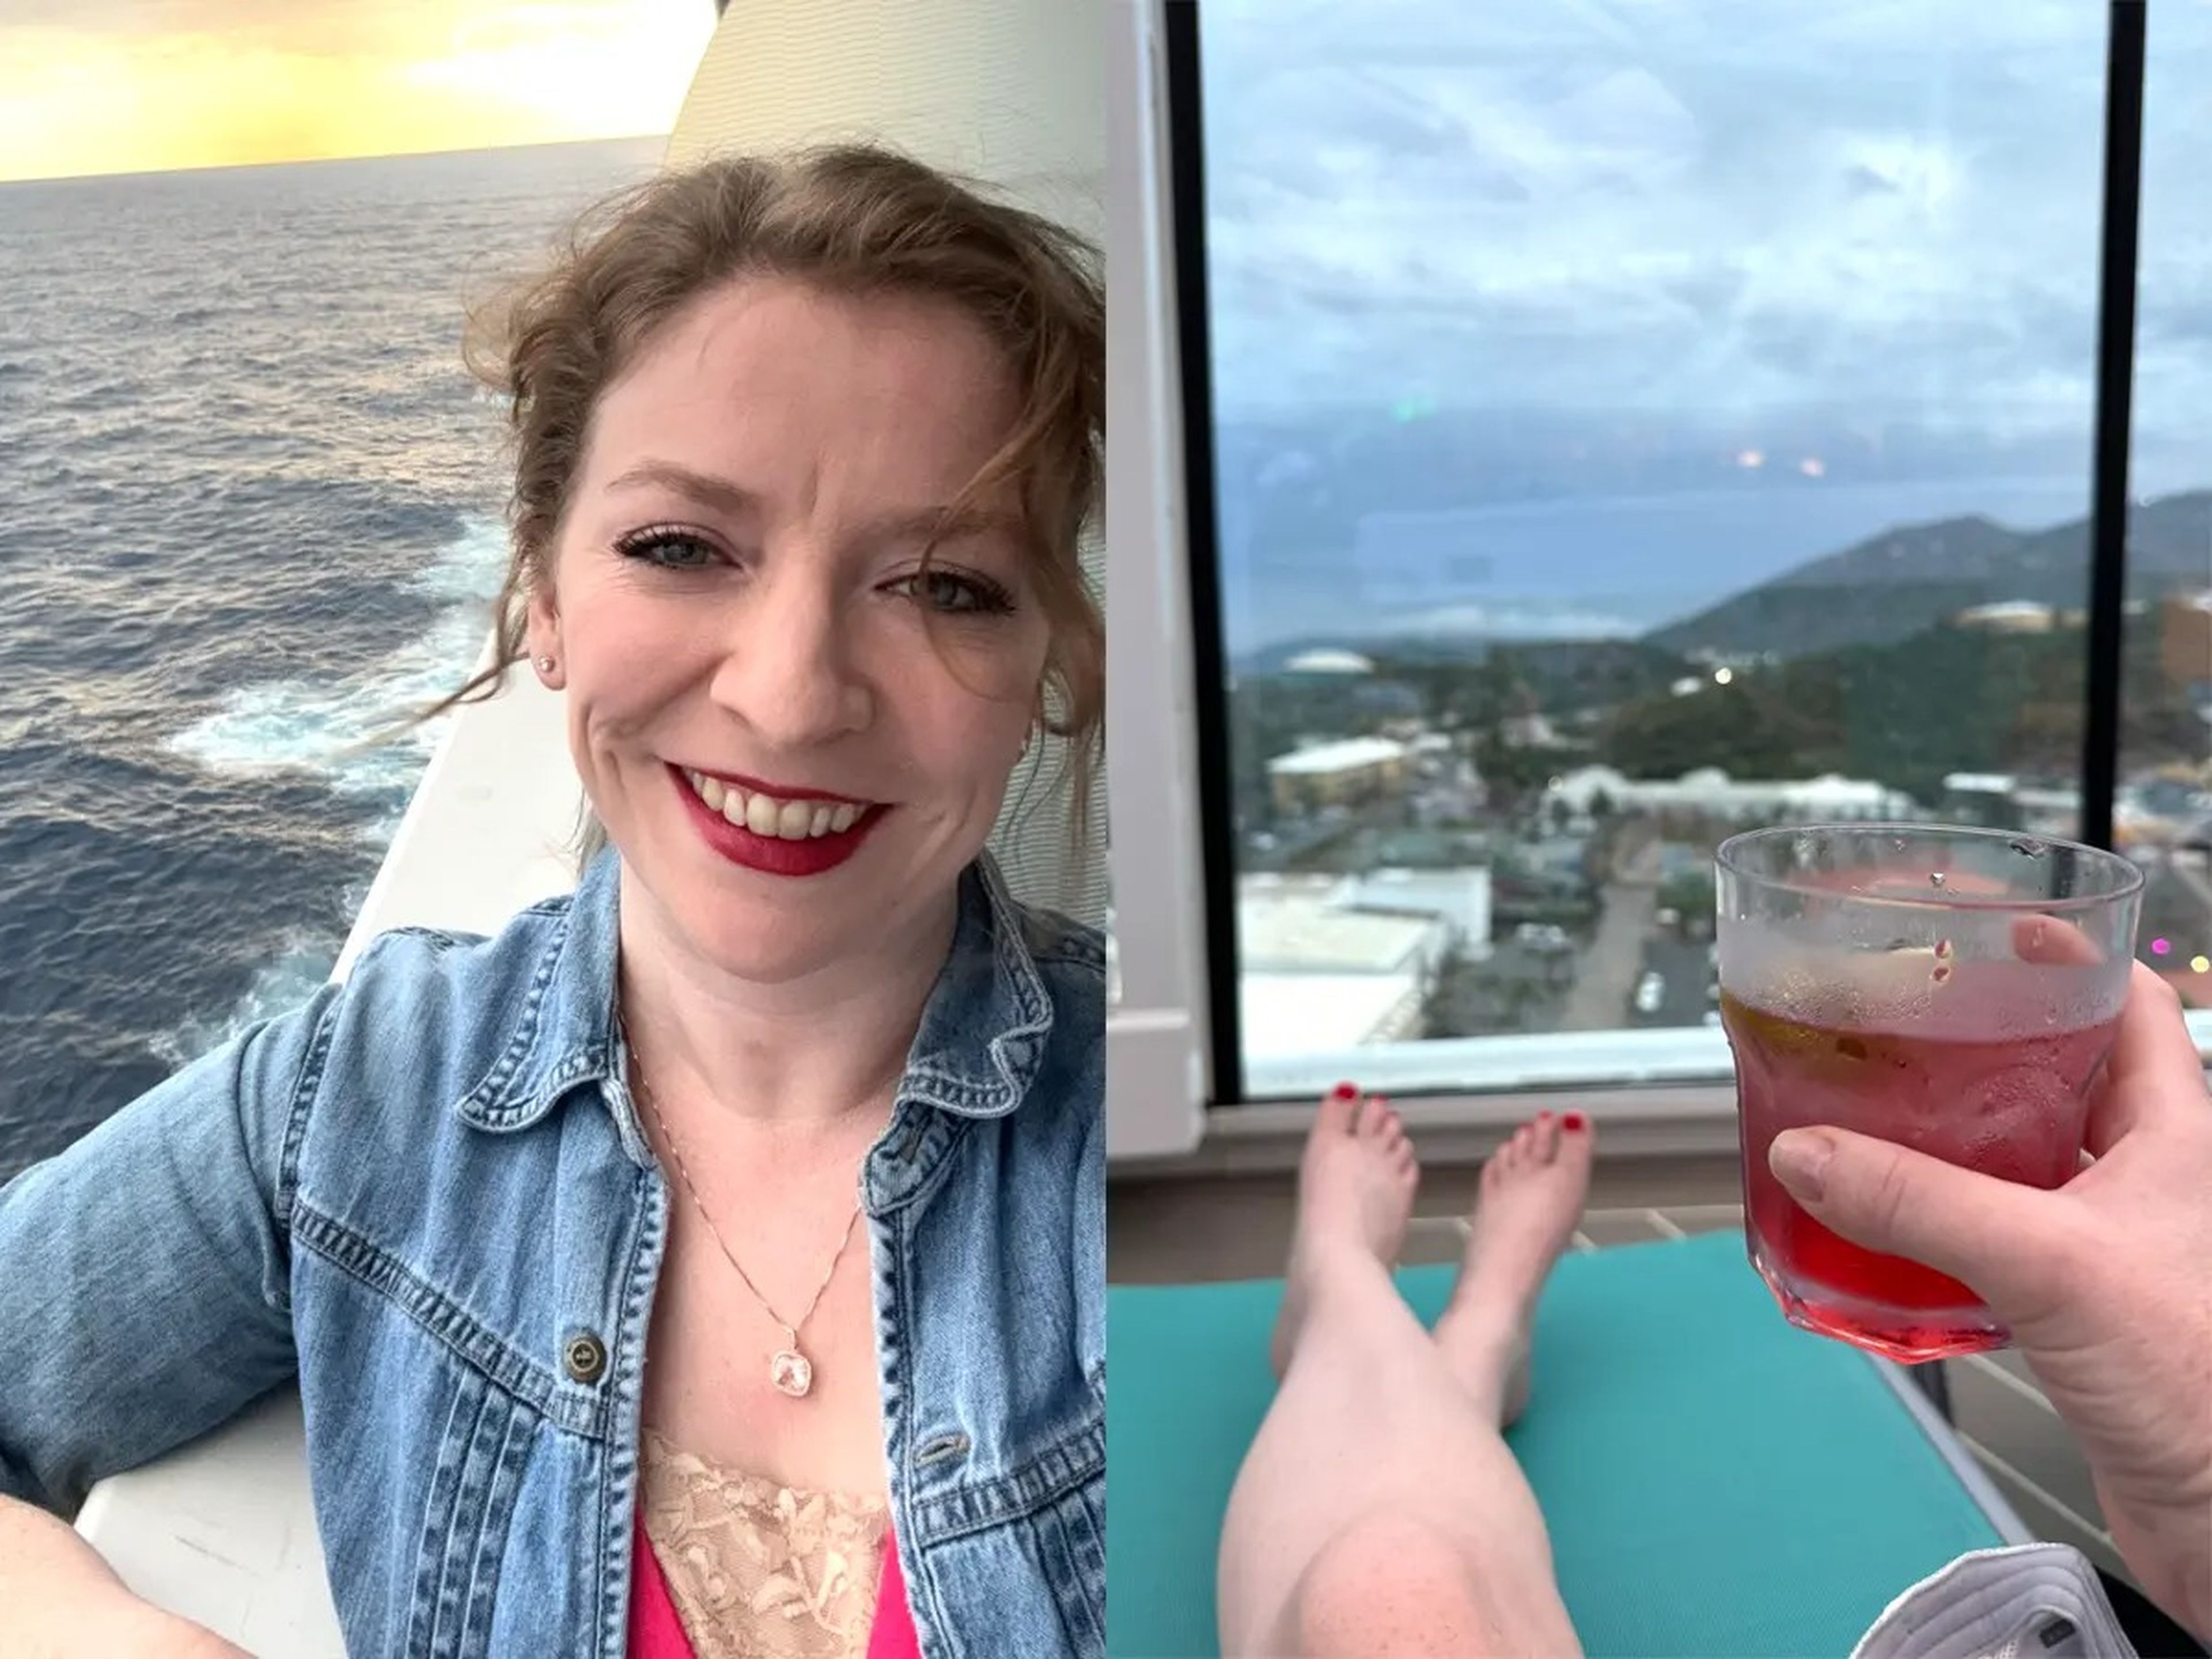 Author Brittany VanDerBill taking a selfie on a cruise next to her holding a drink in front of a rainy view